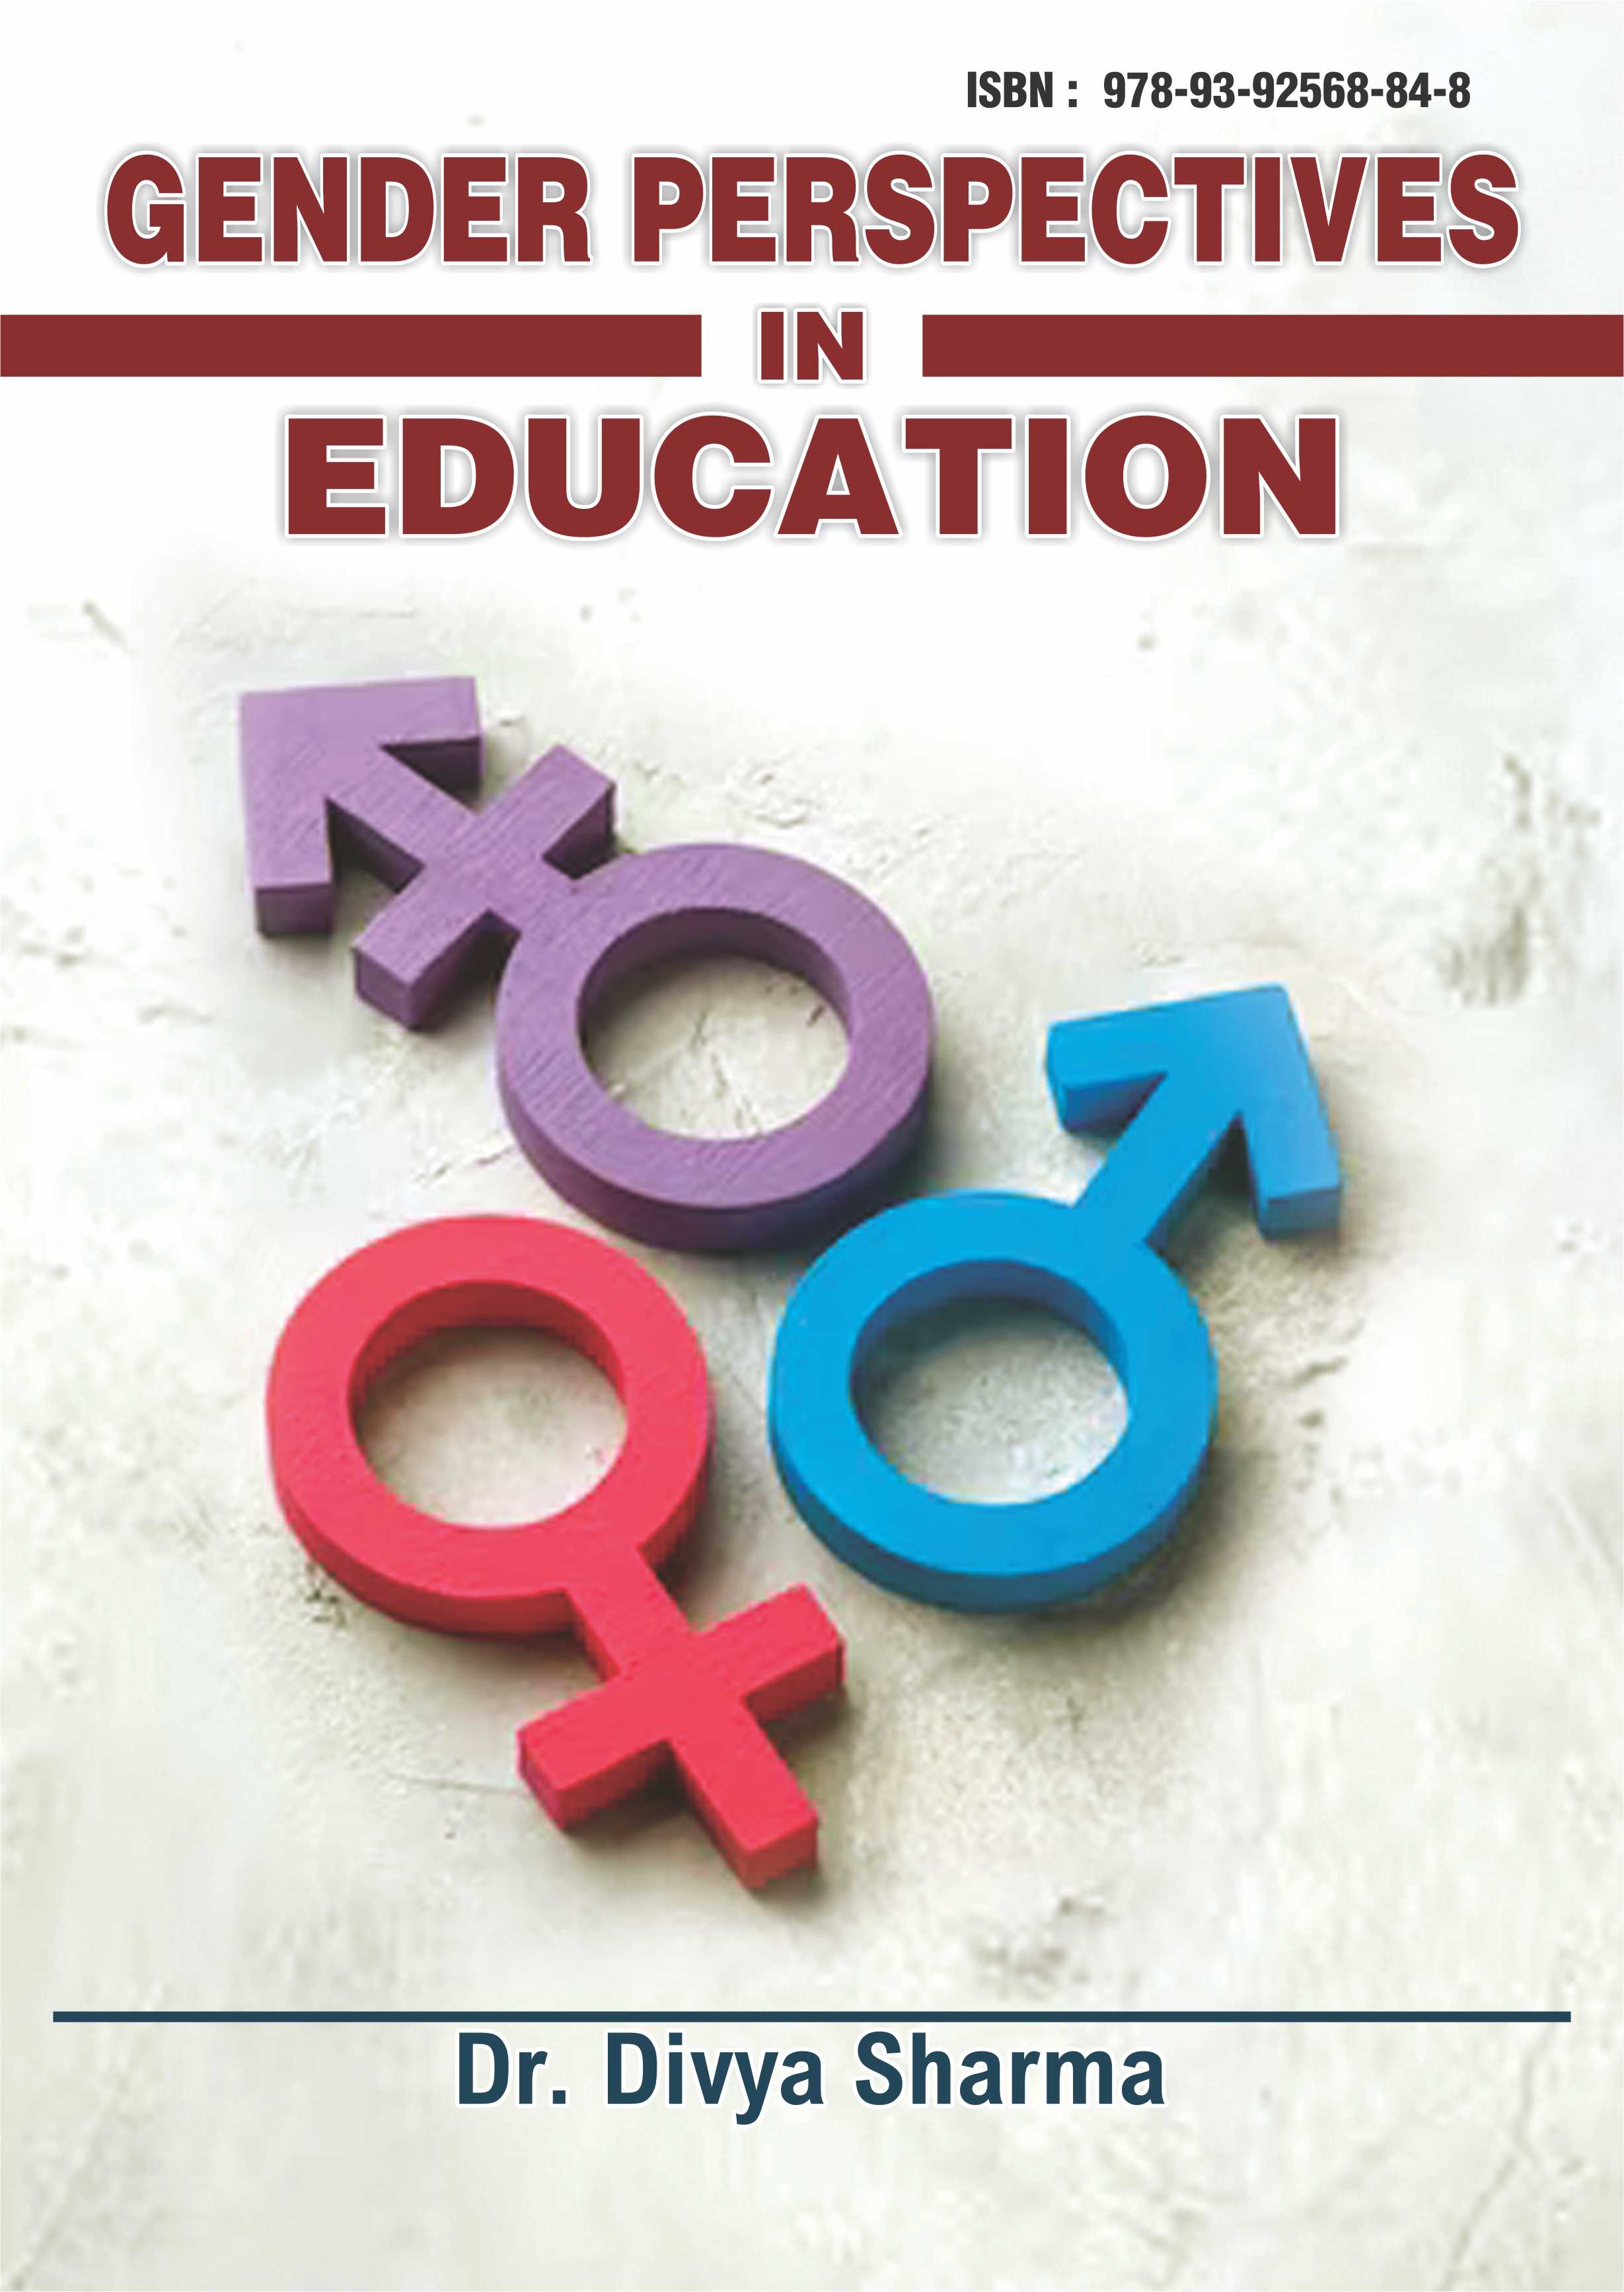 Gender Perspectives in Education